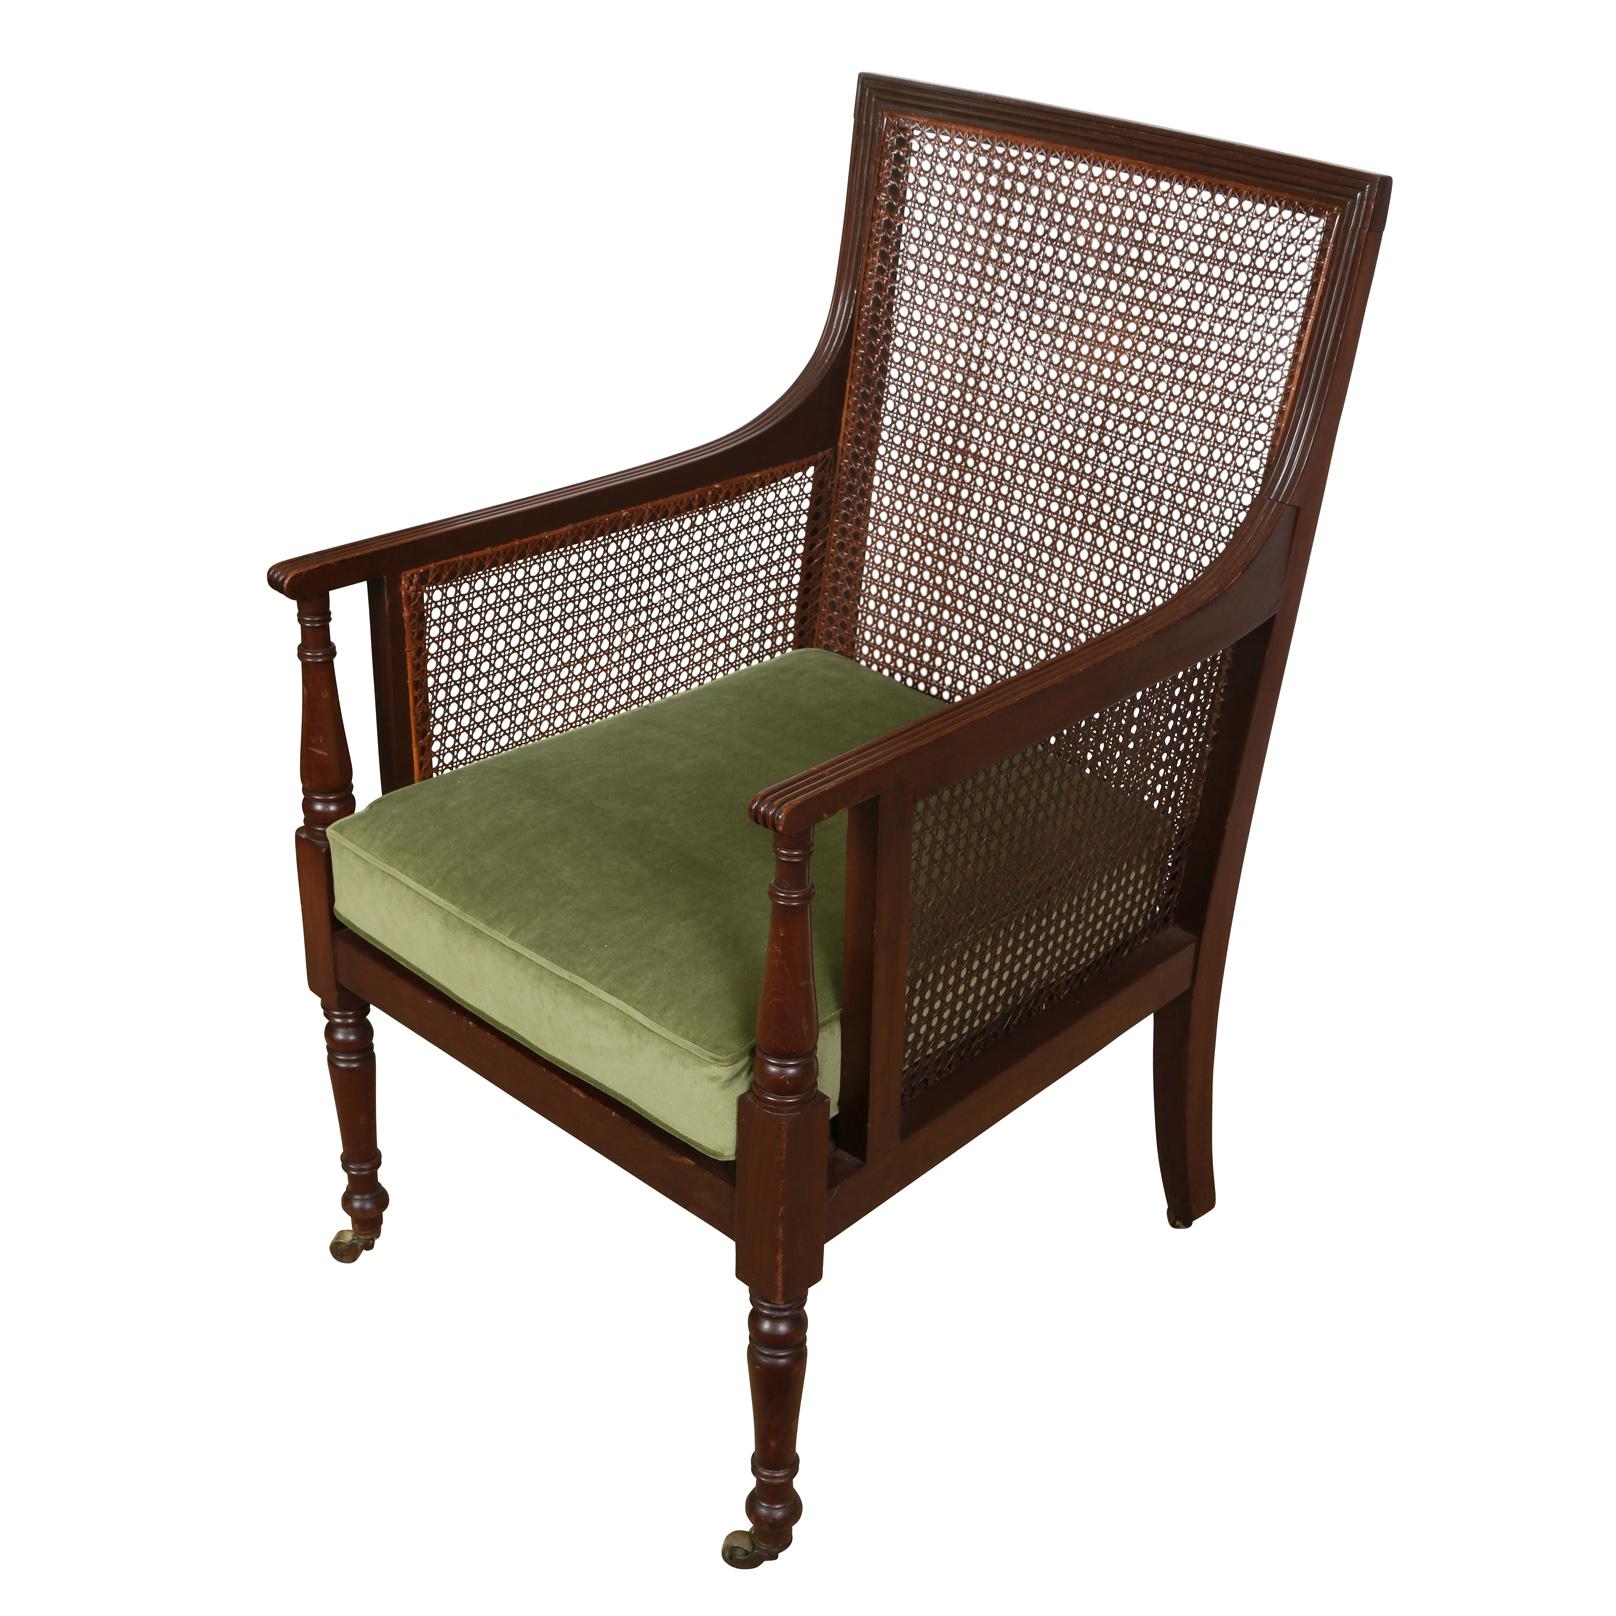 A vintage stately Regency style caned chair with straight frame caned sides and back with reeded arms and turned legs that continue to the arm rests and end on casters at the base. The chair seat is newly upholstered with a mossy green velvet, box